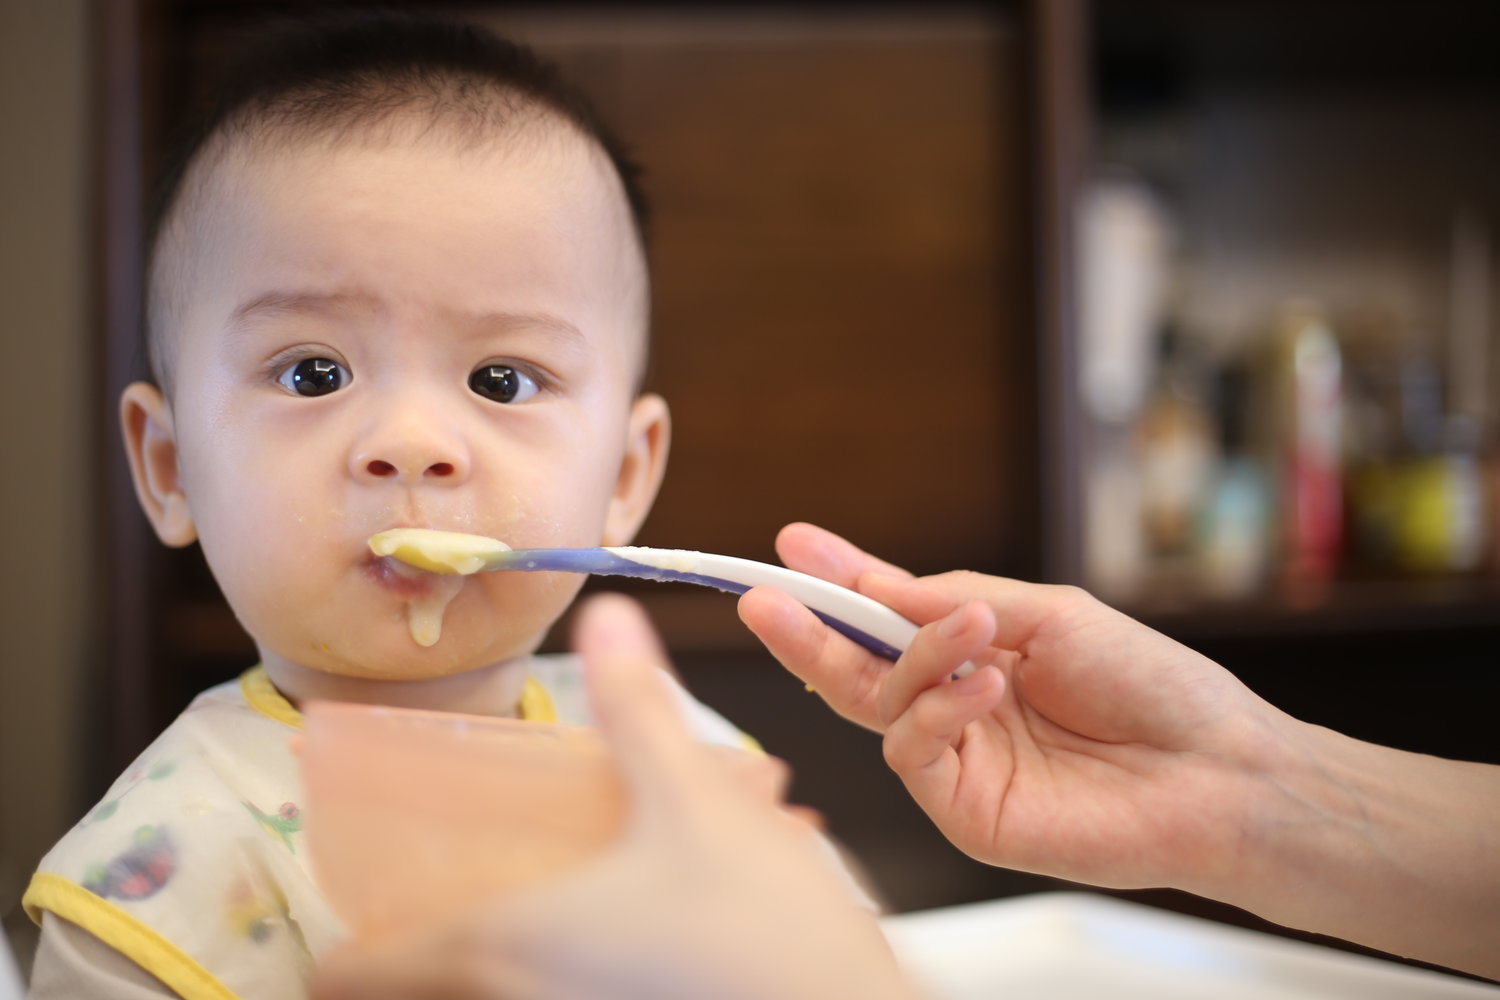 How to Start Baby on Solids with Spoon Feeding